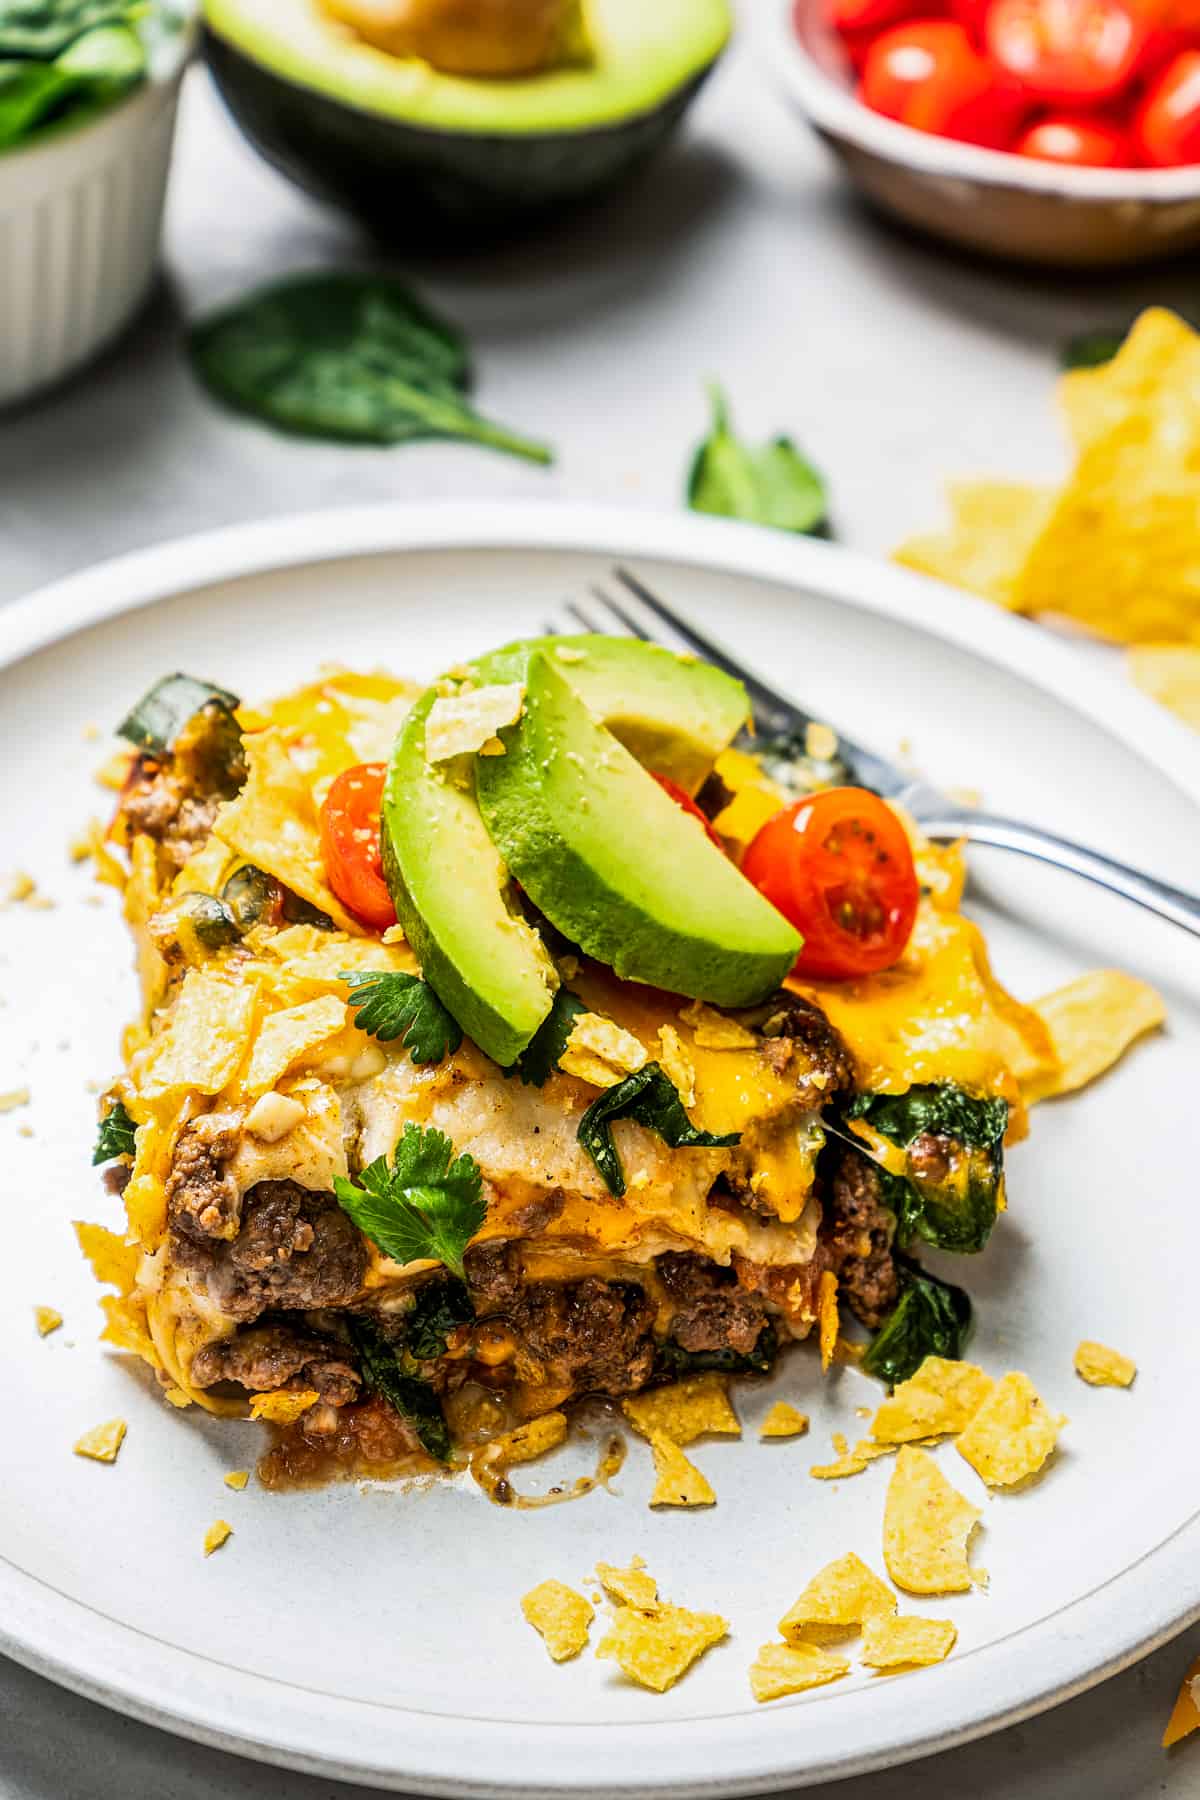 A serving of taco casserole on a white plate garnished with avocado slices and cherry tomatoes.